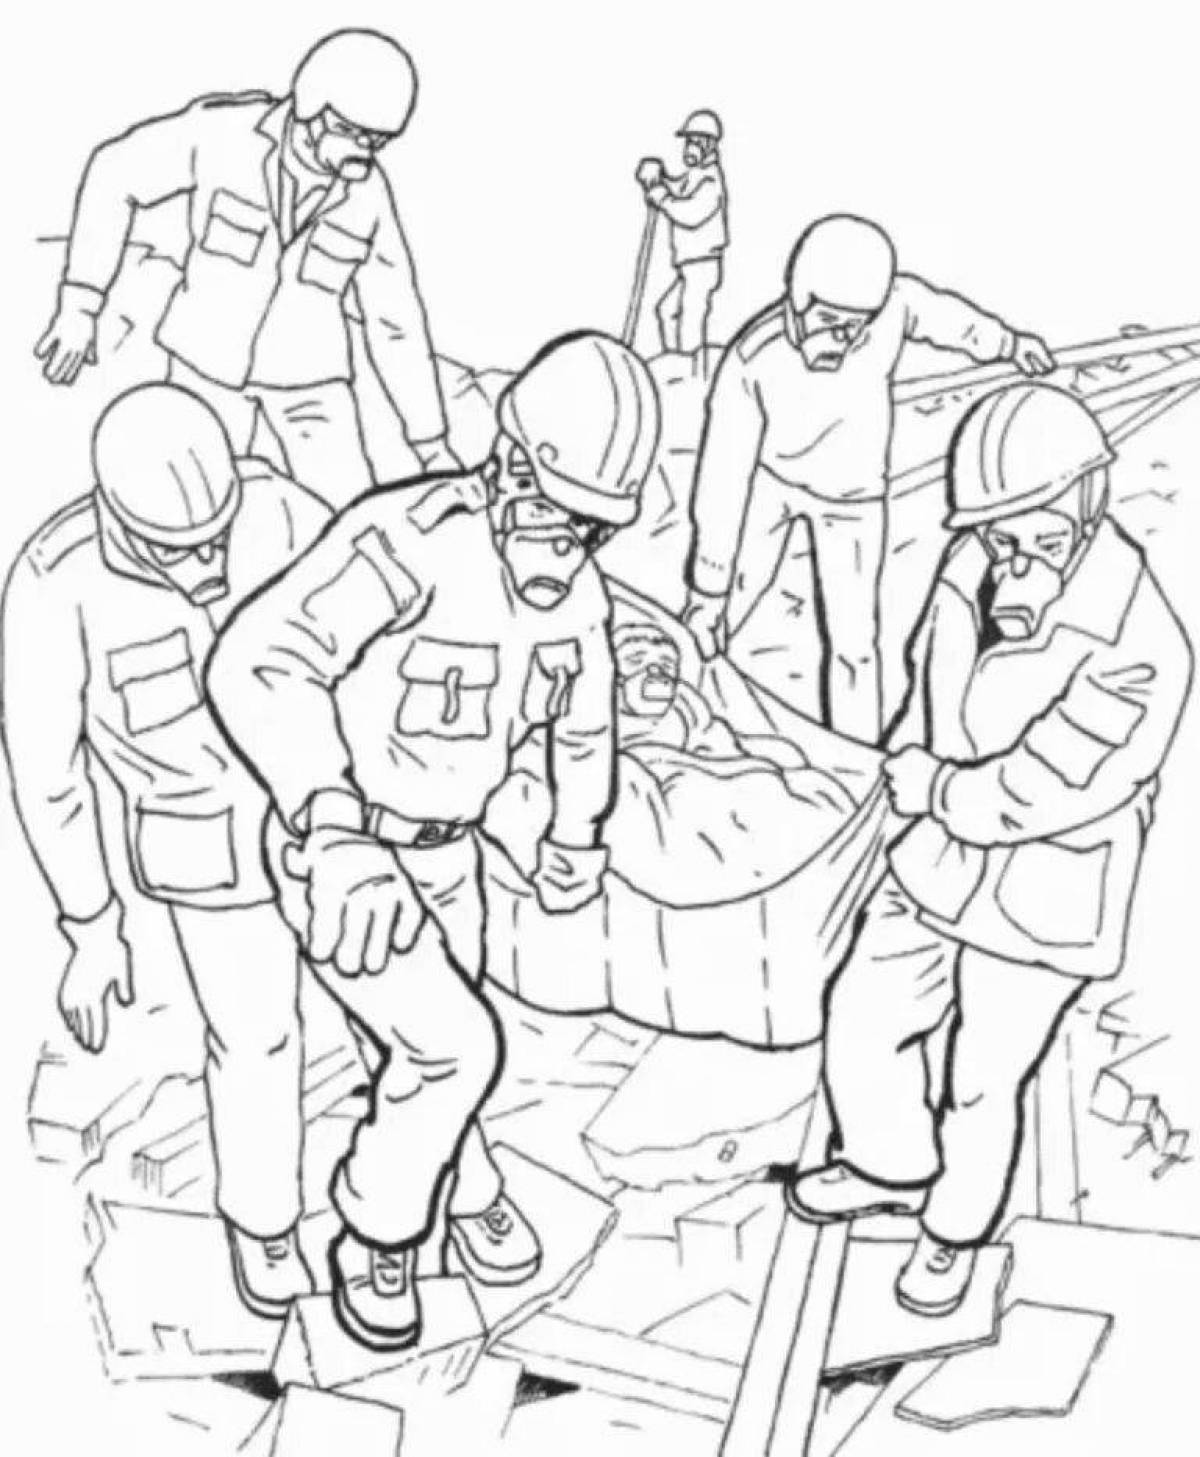 Coloring page joyful rescuers